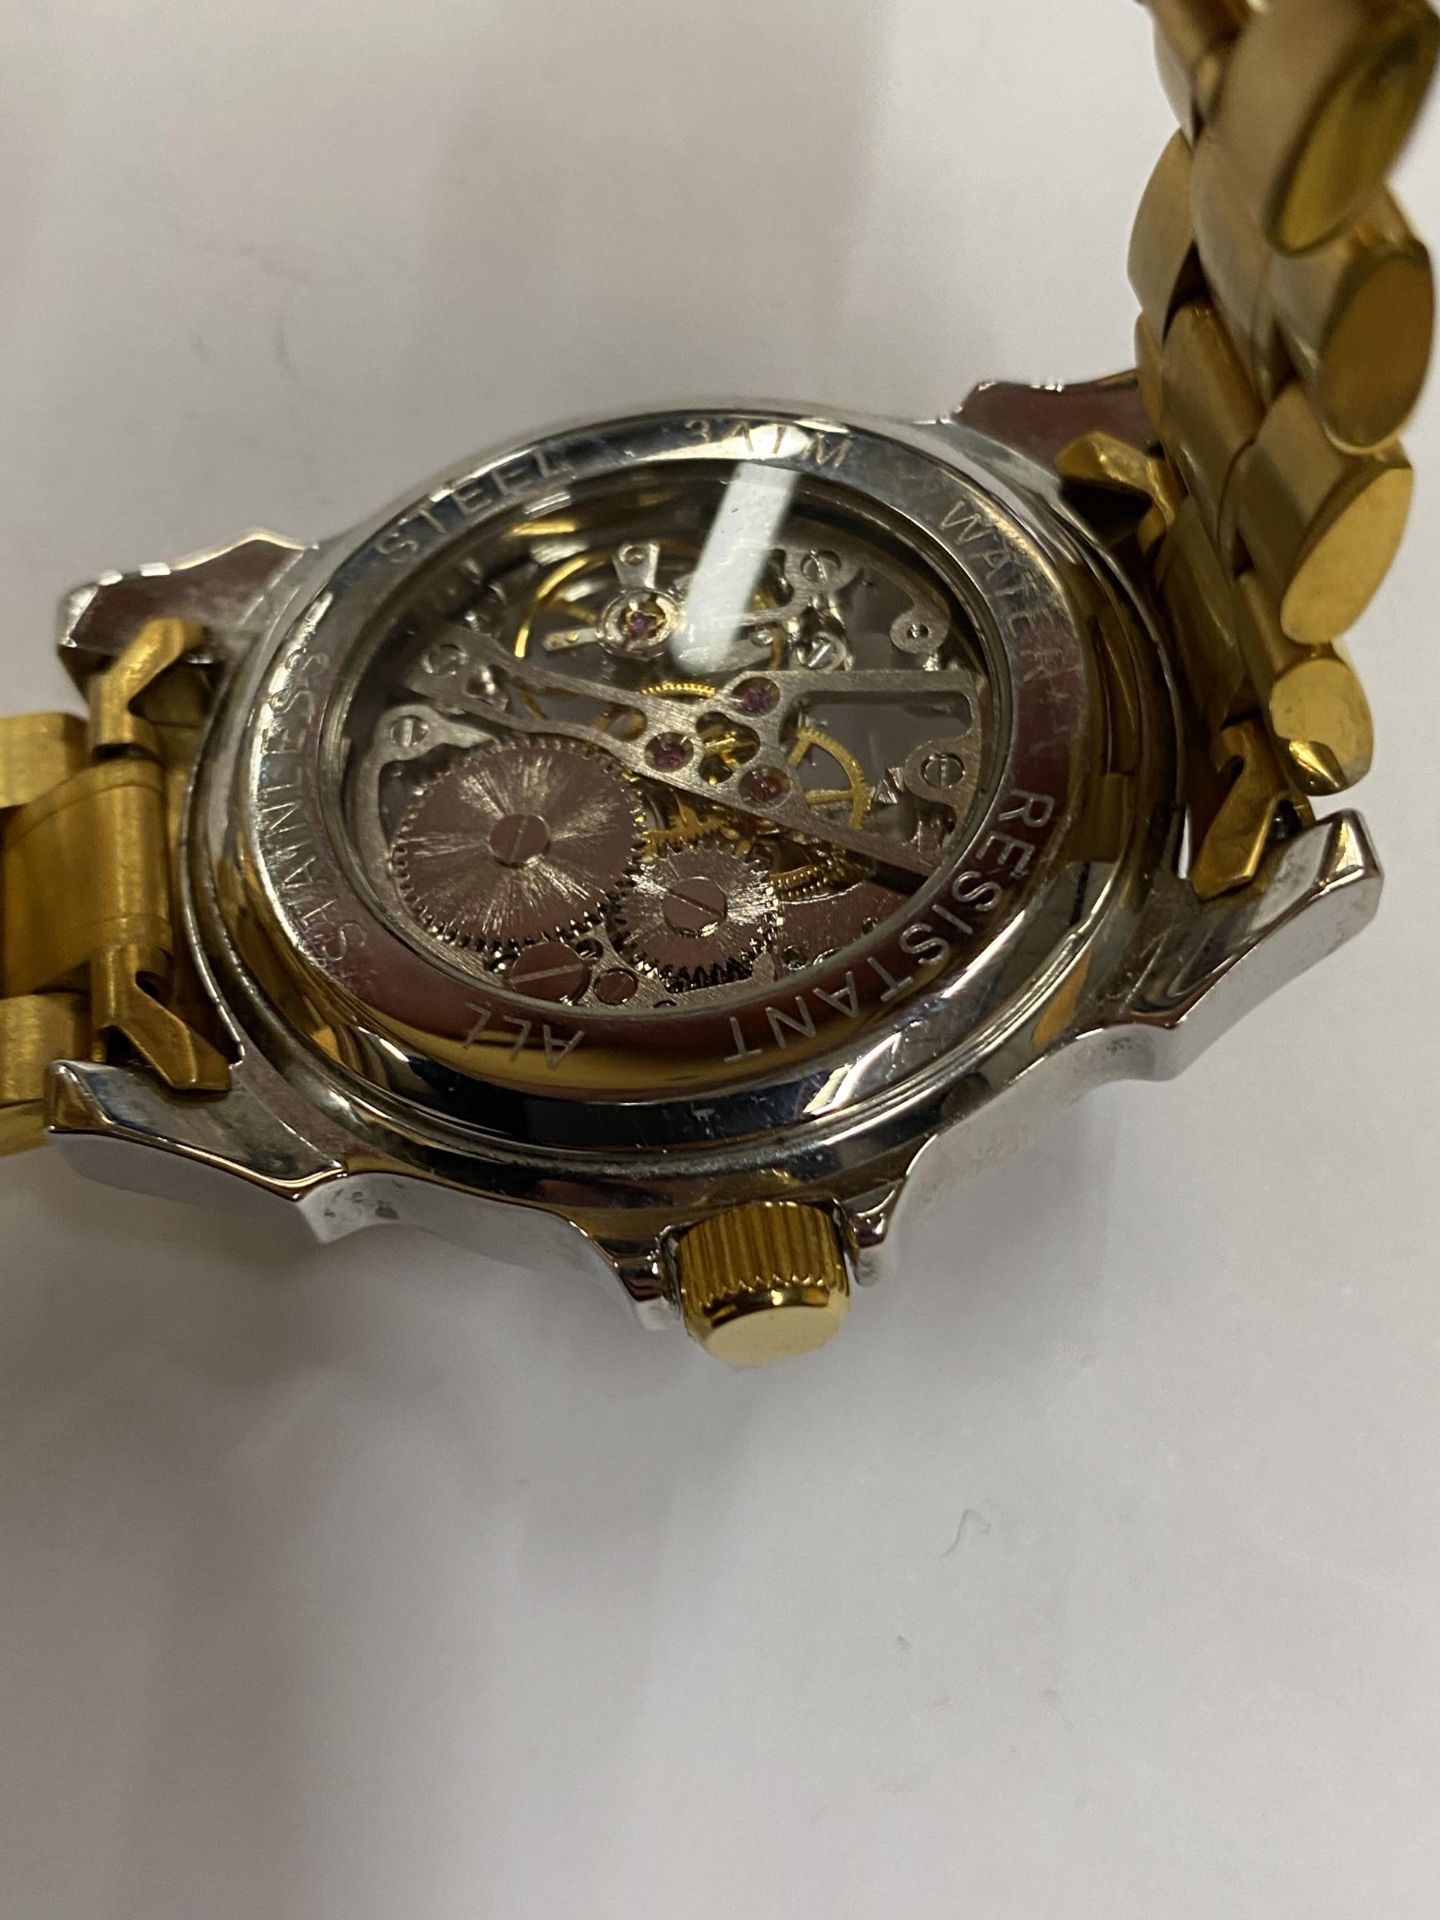 A GENTS SKELETON WATCH, WORKING WHEN CATALOGUED BUT NO WARRANTIES GIVEN - Image 3 of 3